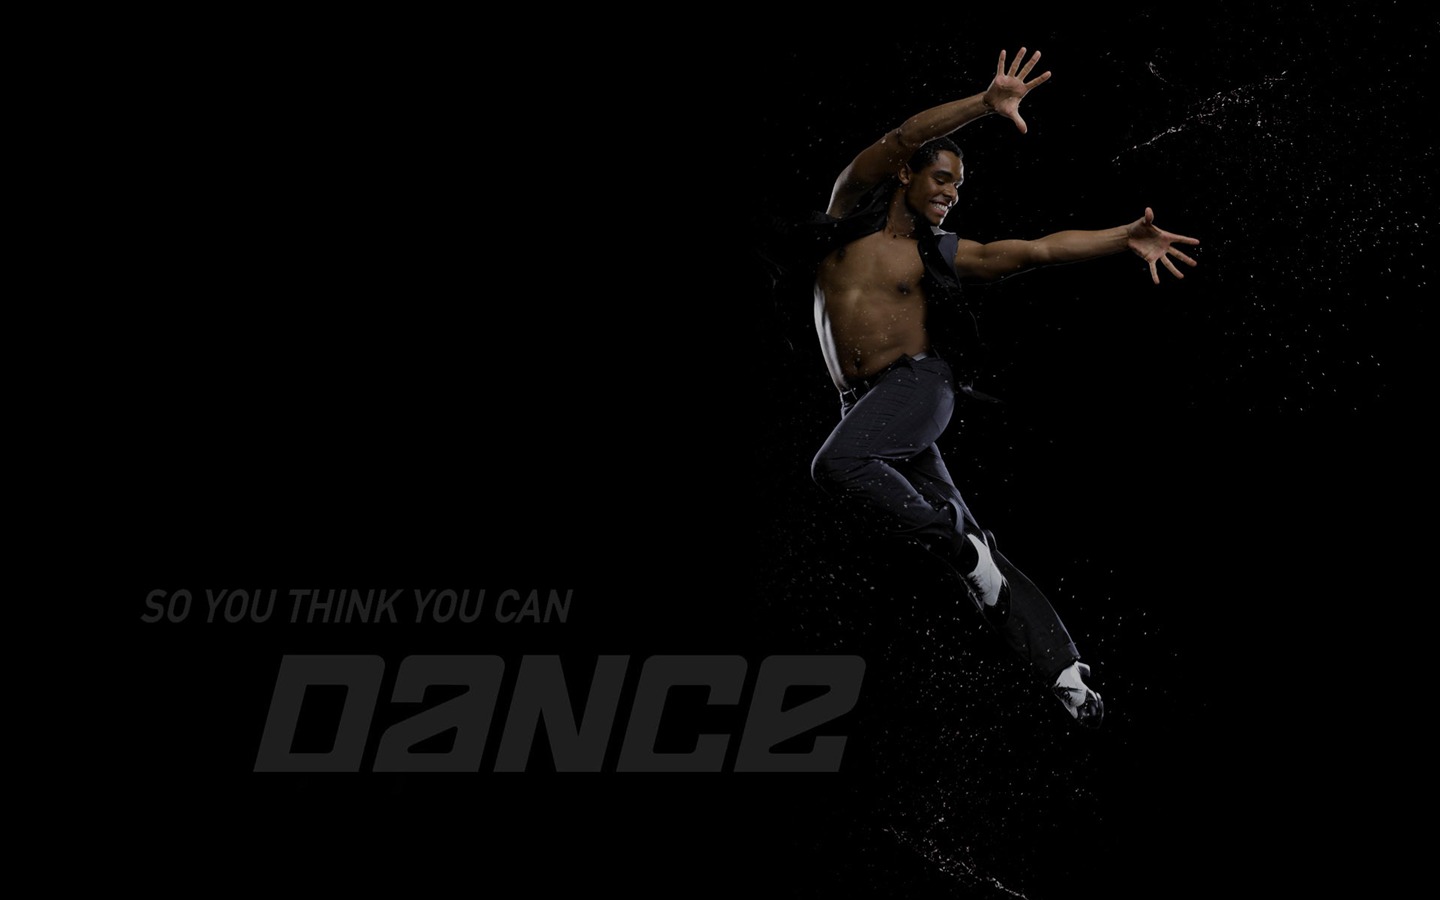 So You Think You Can Dance 舞林爭霸壁紙(二) #20 - 1440x900